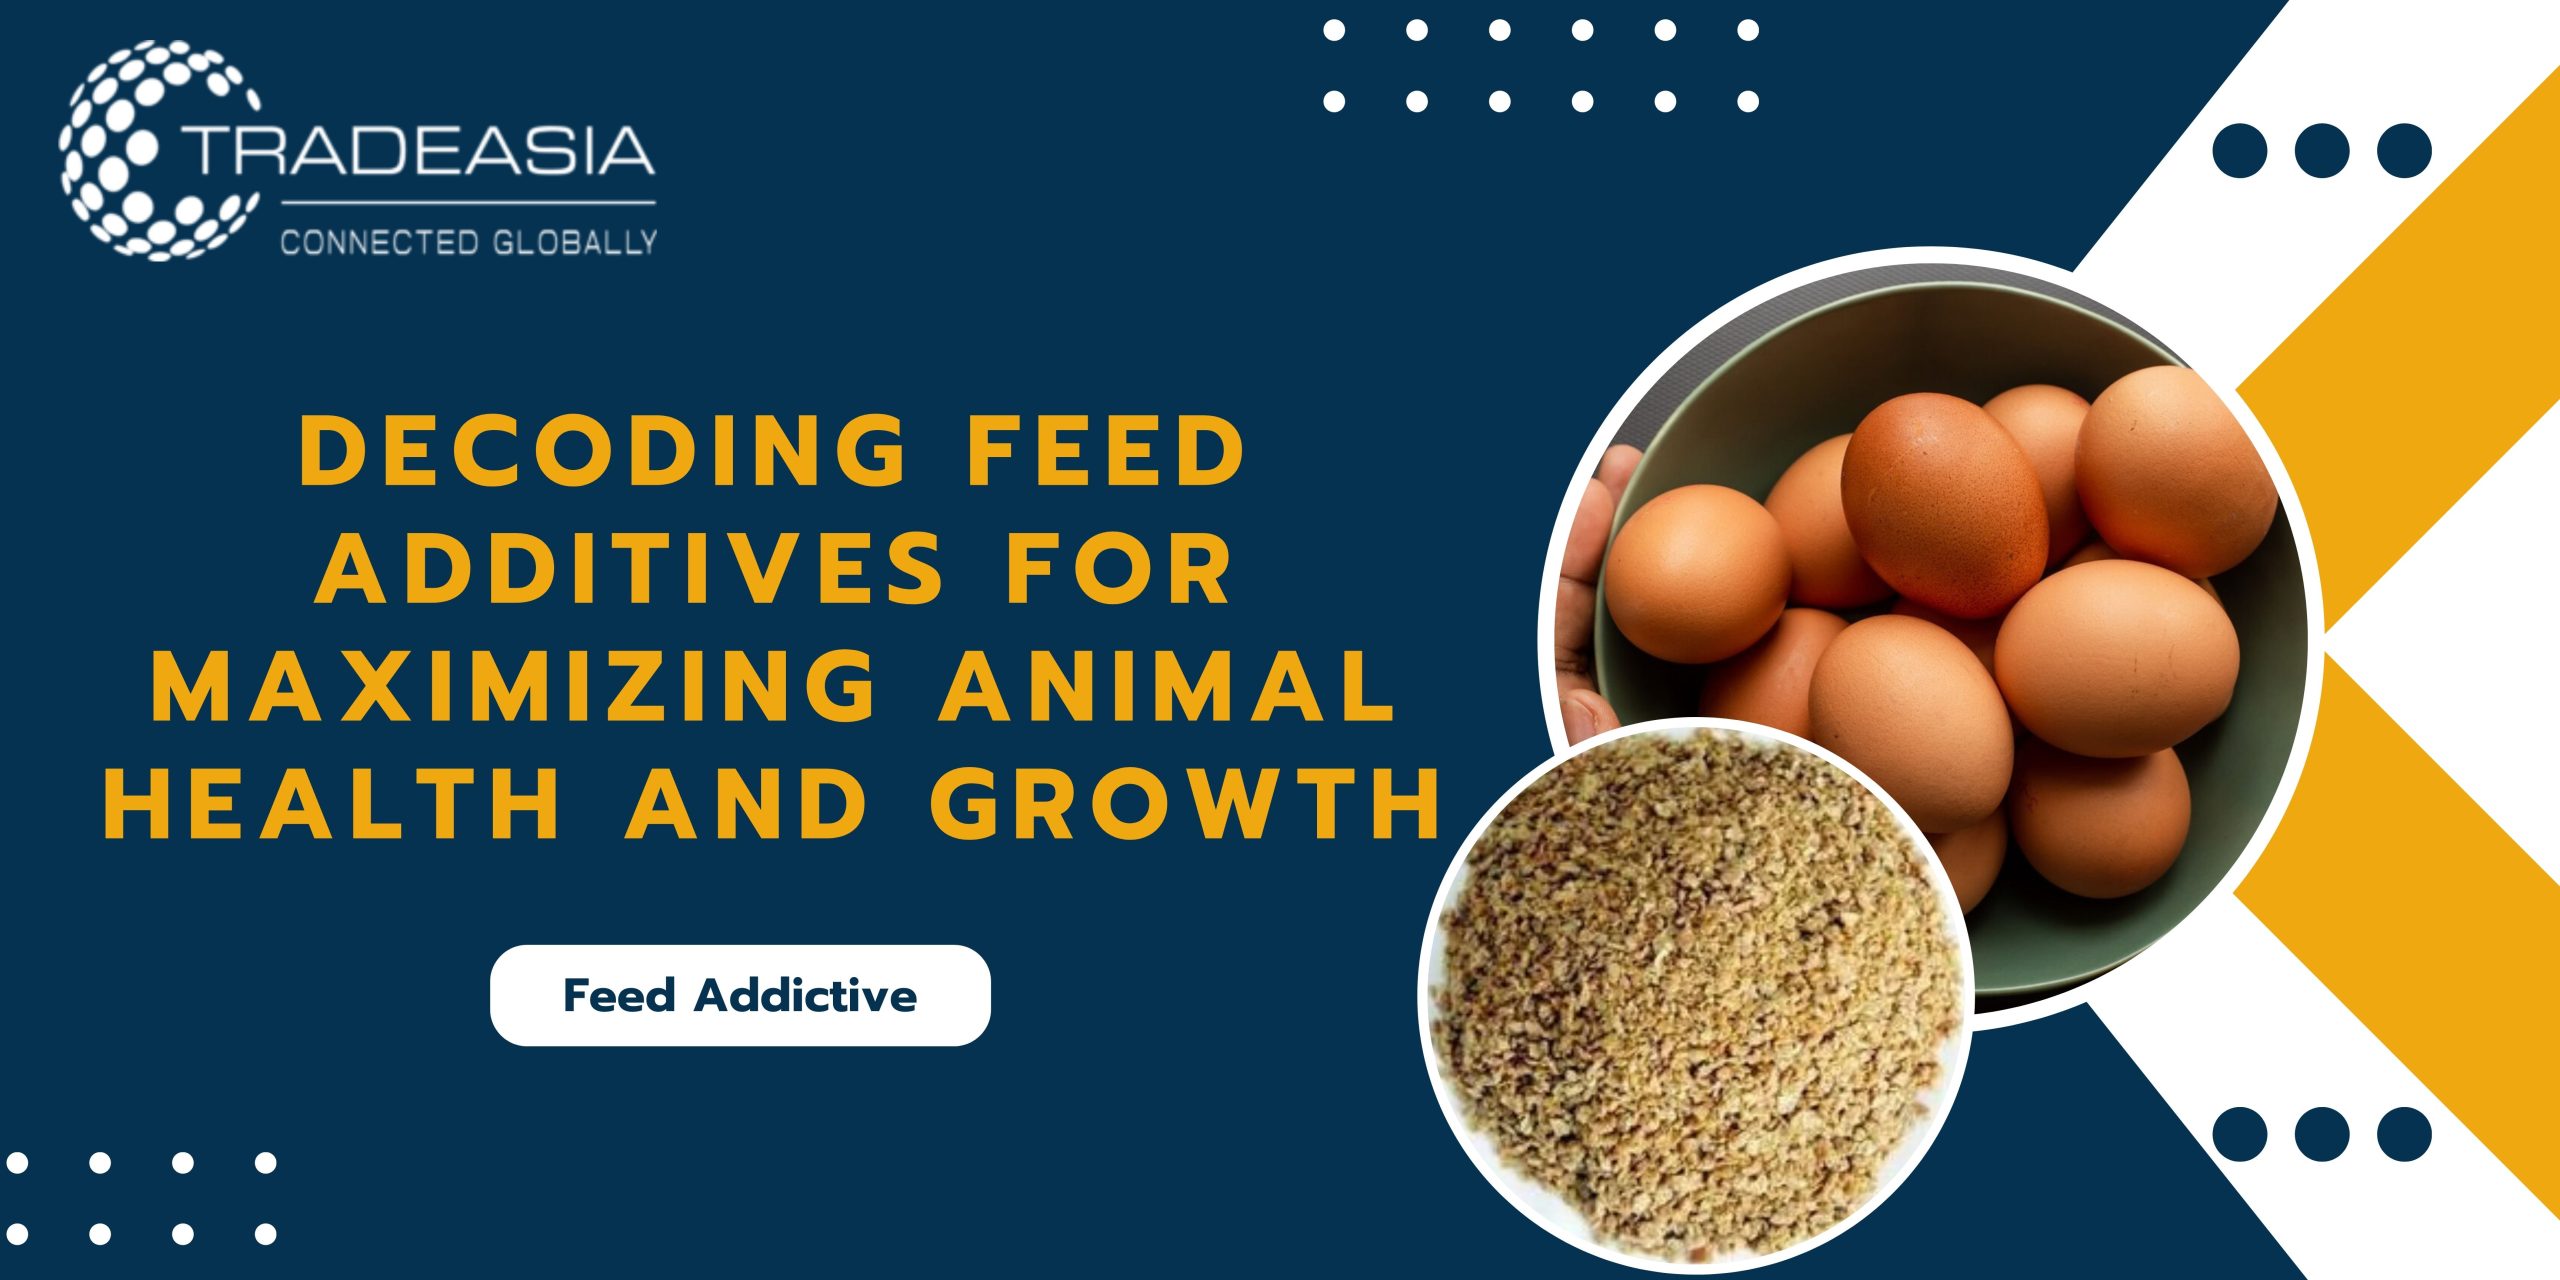 Decoding Feed Additives for Maximizing Animal Health and Growth